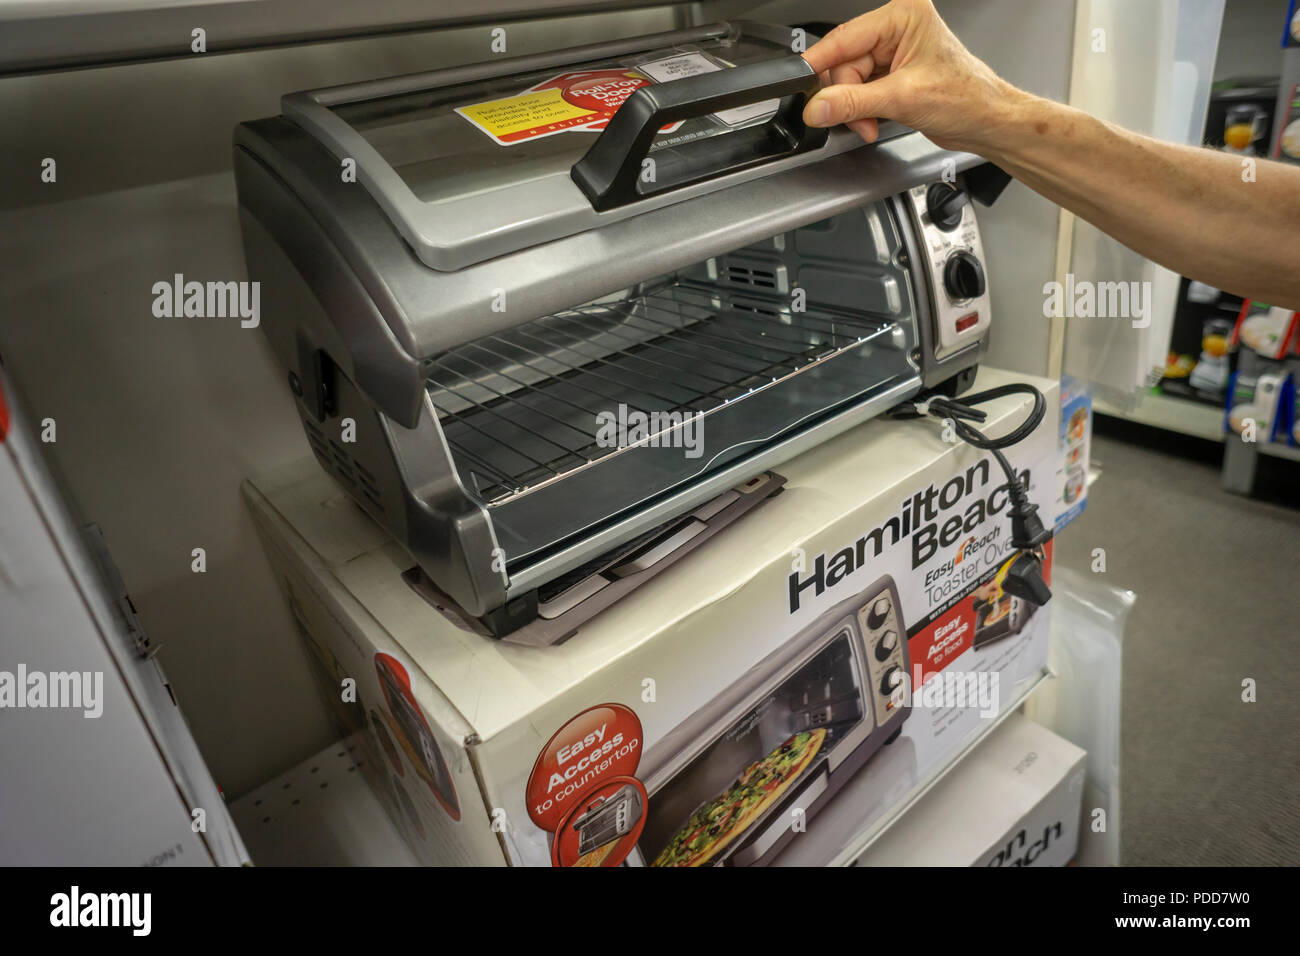 A shopper chooses a Hamilton Beach brand toaster oven in a home goods store in New York on Wednesday, August 1, 2018. Hamilton Beach is scheduled to report quarterly earnings on August 2 prior to the bell.  (© Richard B. Levine) Stock Photo